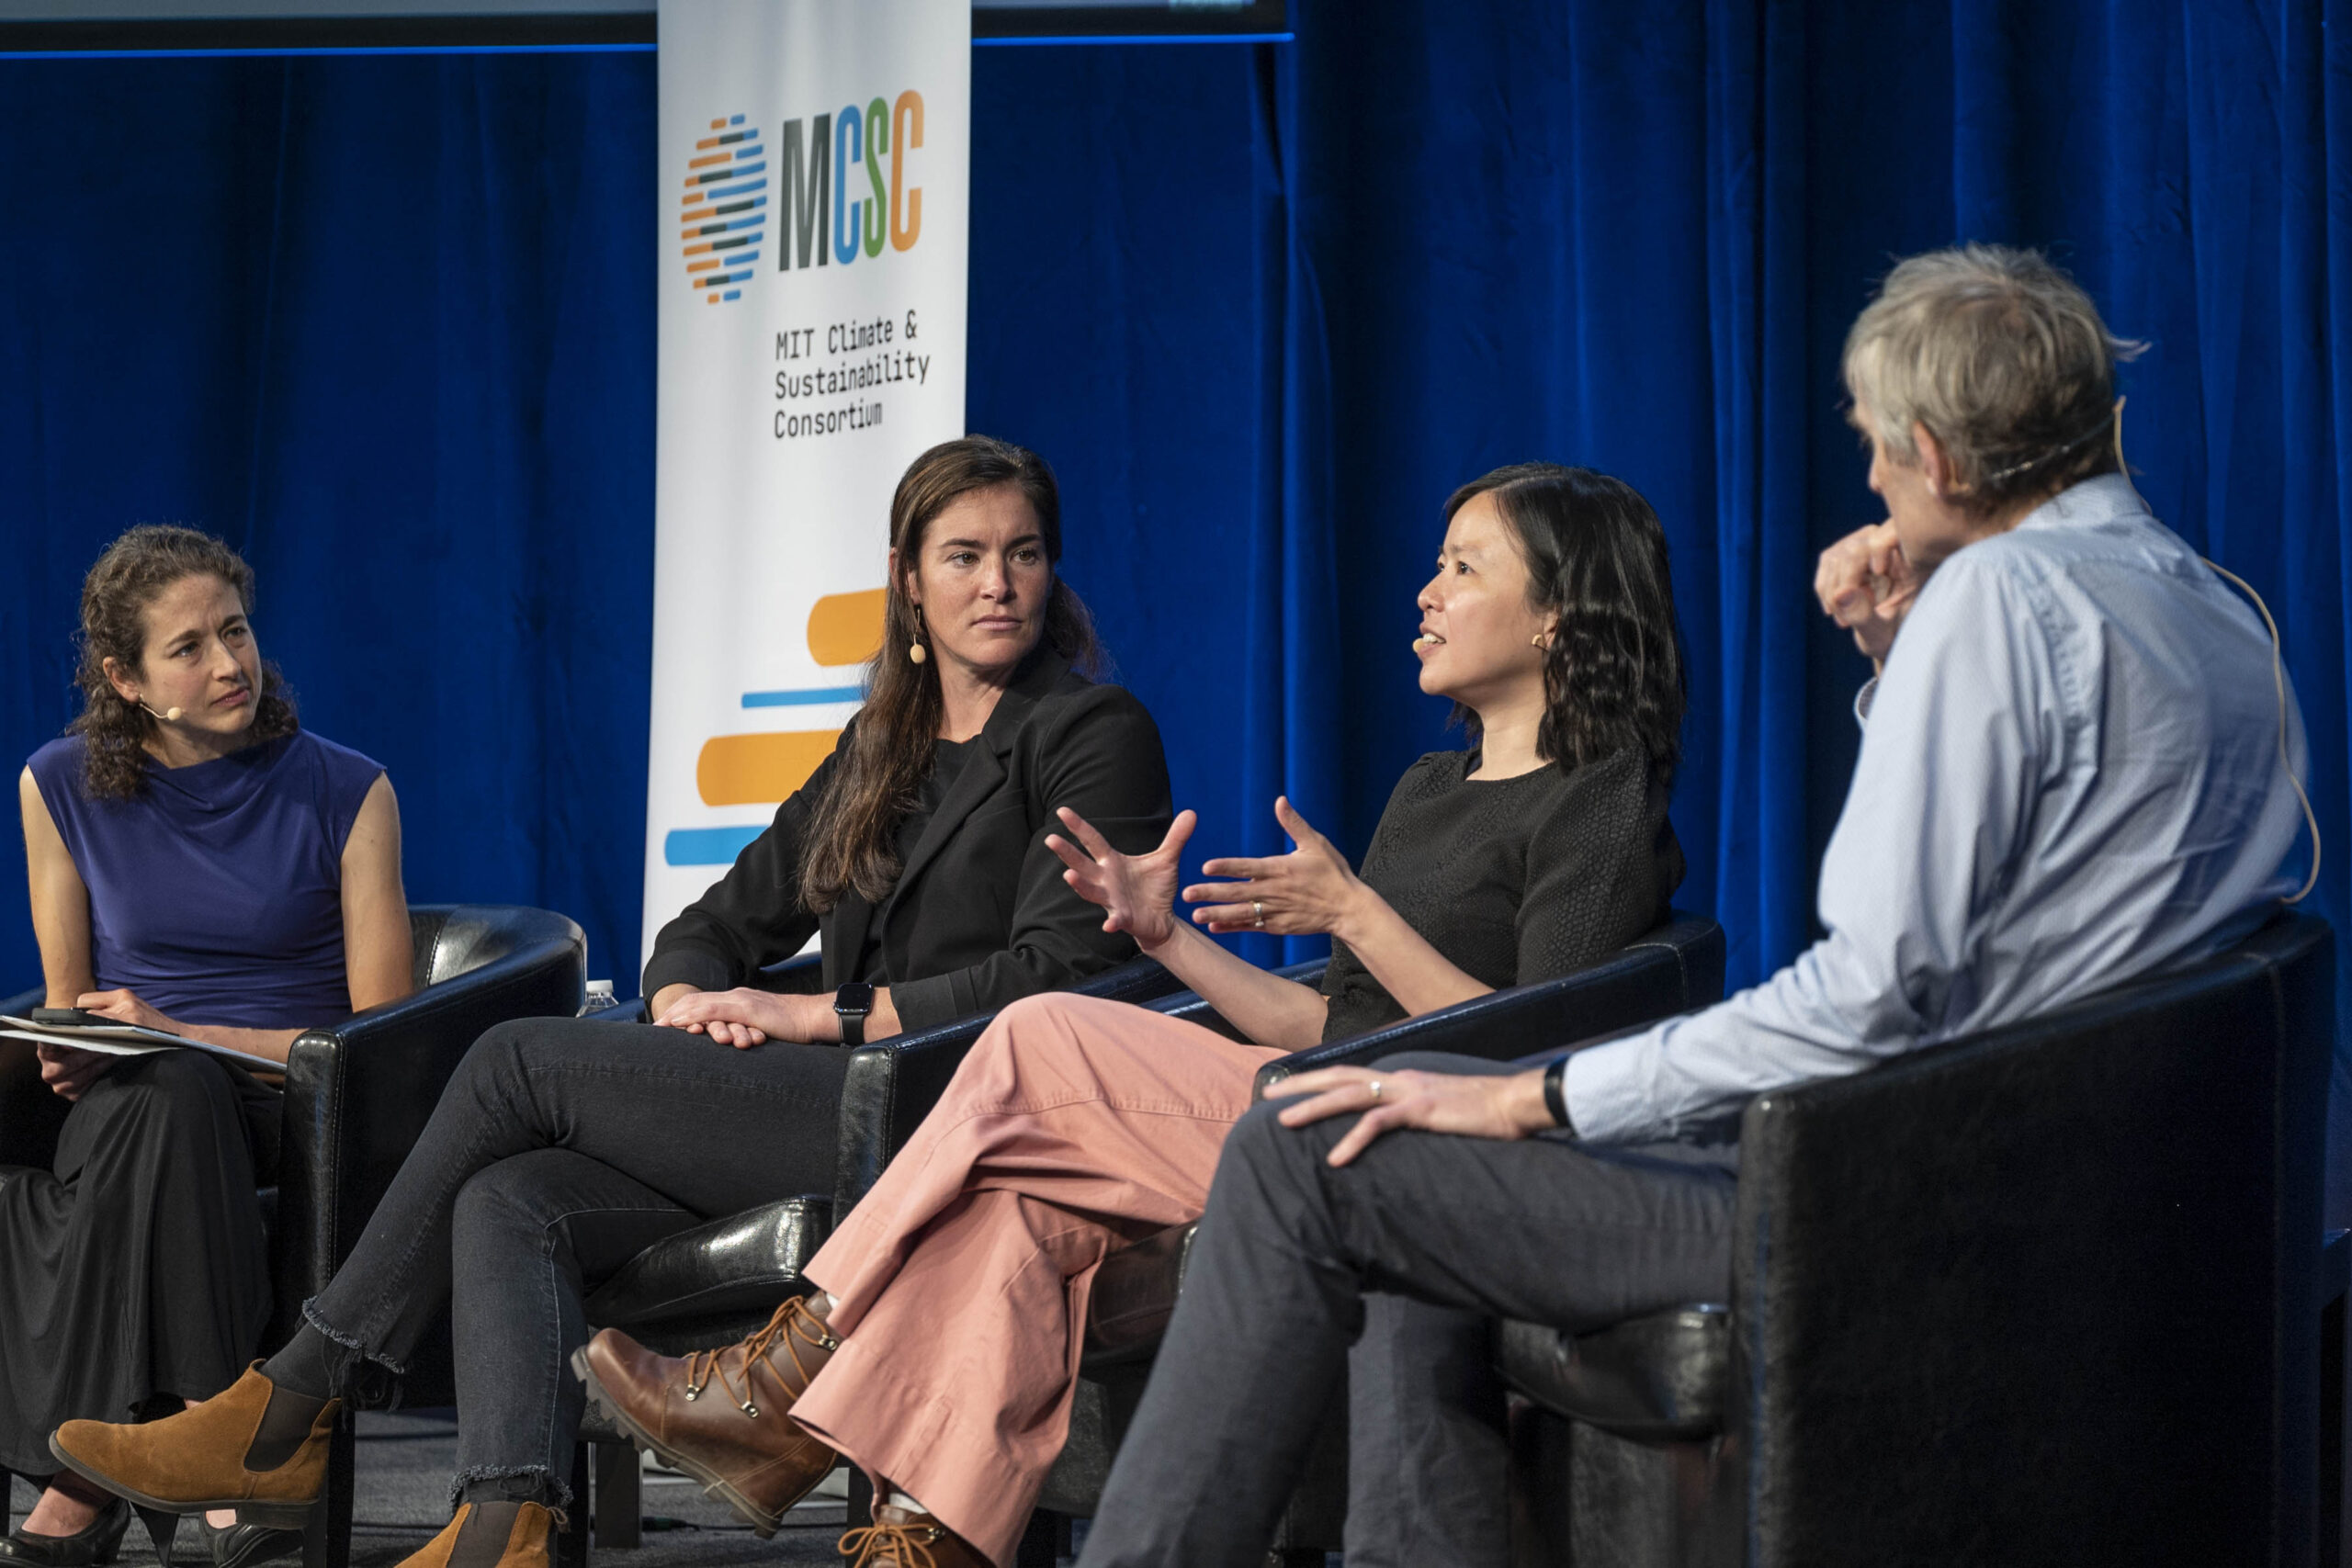 (L-R) Co-Director of the MCSC Elsa Olivetti leads discussion with Susannah Calvin, Carole Jean-Wu, and Jesús del Alamo on the climate implications of computing and communications. Photo by Christopher Harting.